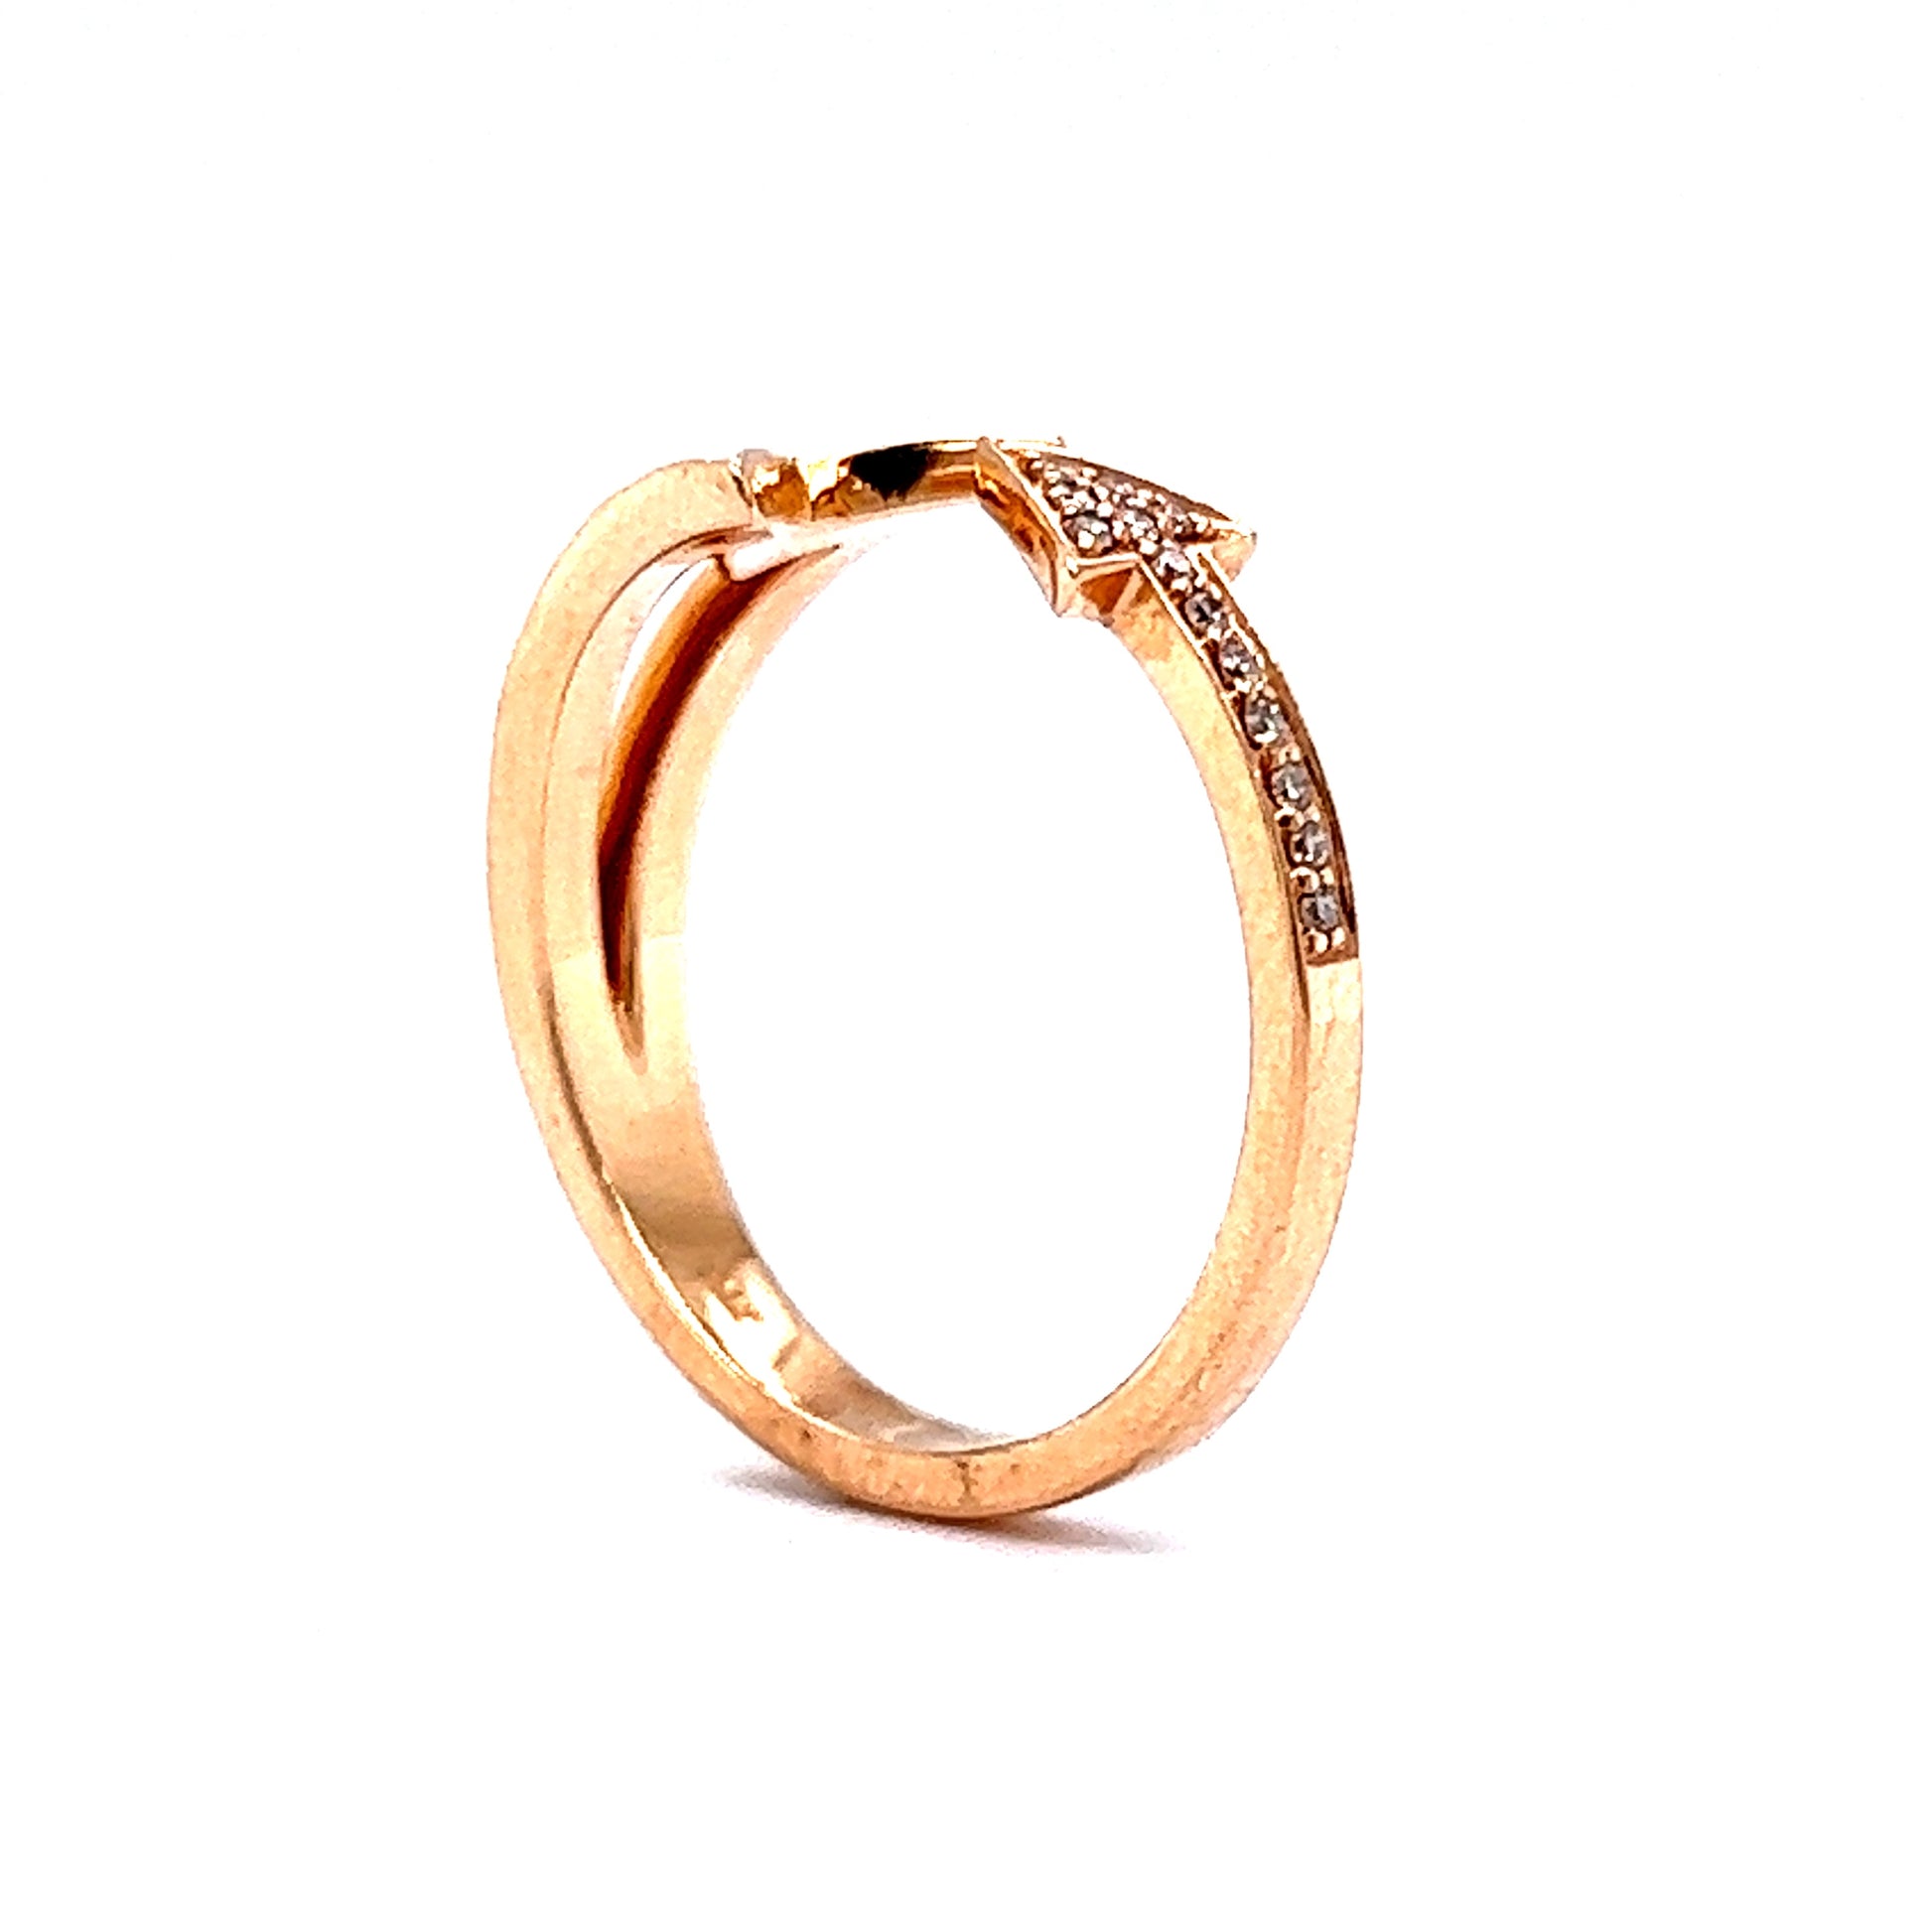 Pave Diamond Arrow Ring in 14k Rose GoldComposition: 14 Karat Rose Gold Ring Size: 7 Total Diamond Weight: .23ct Total Gram Weight: 2.6 g Inscription: 14k
      